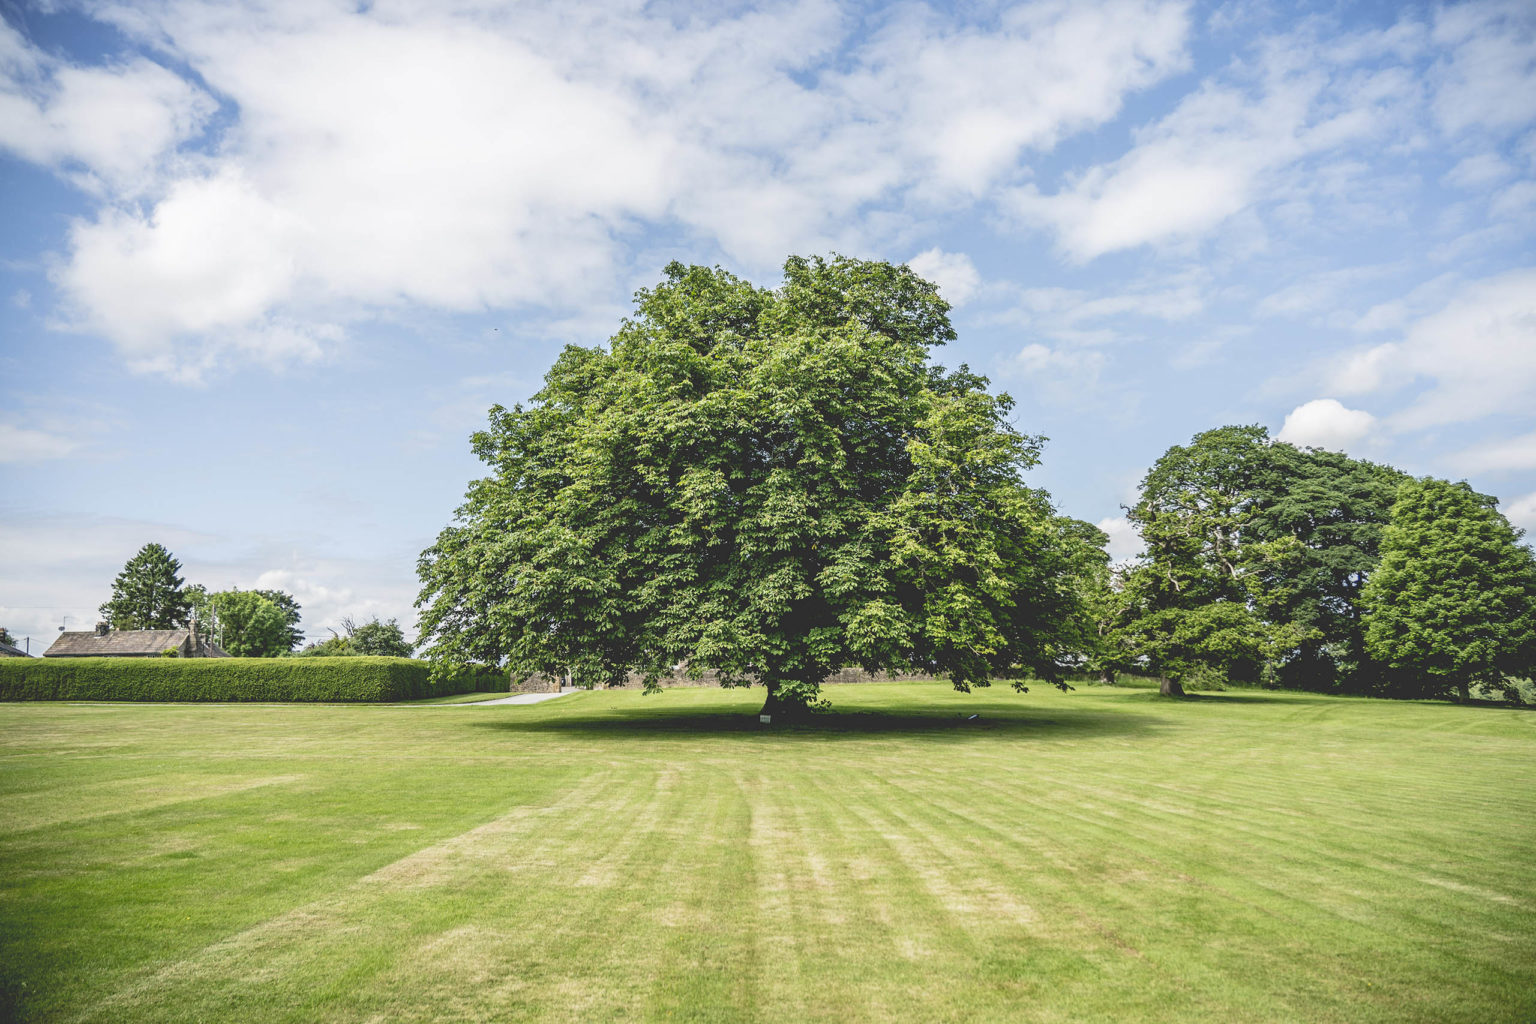 A large tree on the lawn at Swinton Park Hotel on the Swinton Estate in North Yorkshire